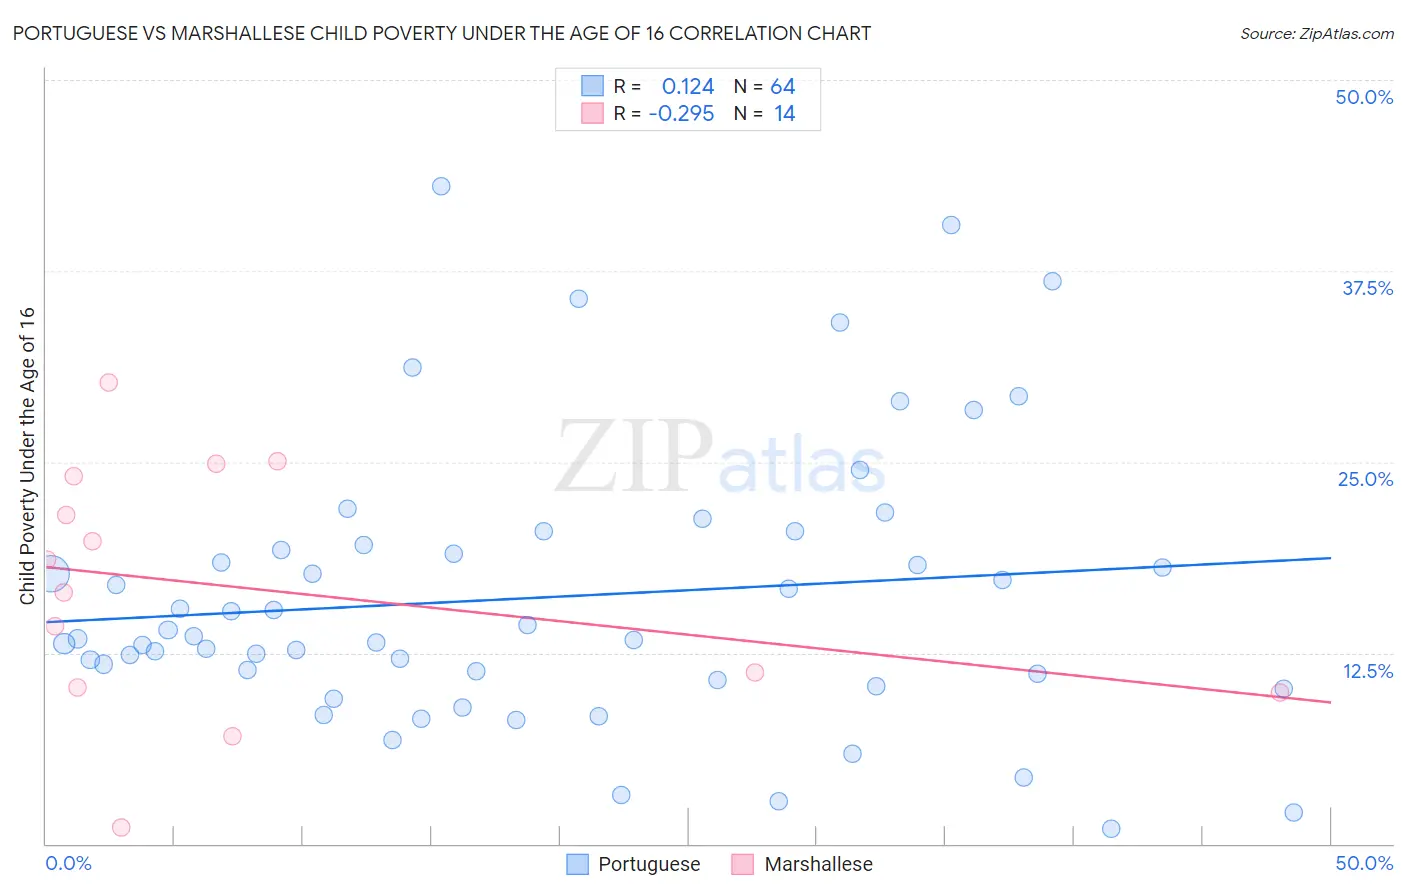 Portuguese vs Marshallese Child Poverty Under the Age of 16